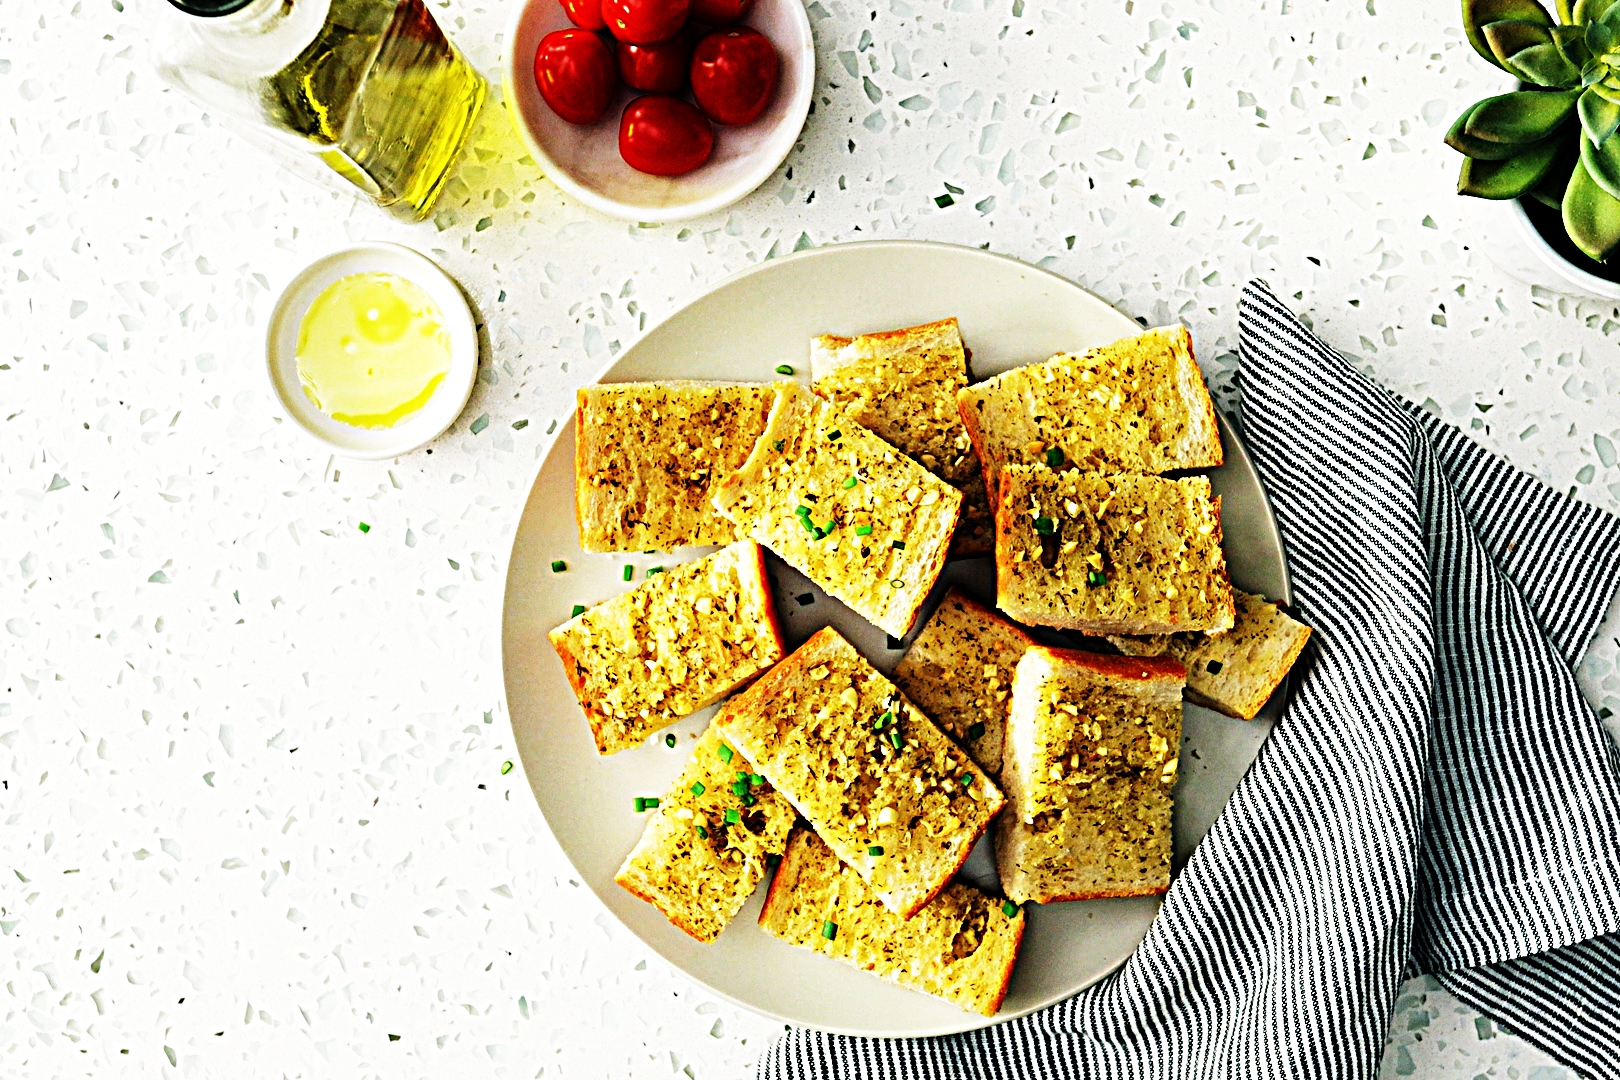 Stupid-Easy Recipe for Vegan Garlic Bread (#1 Top-Rated)